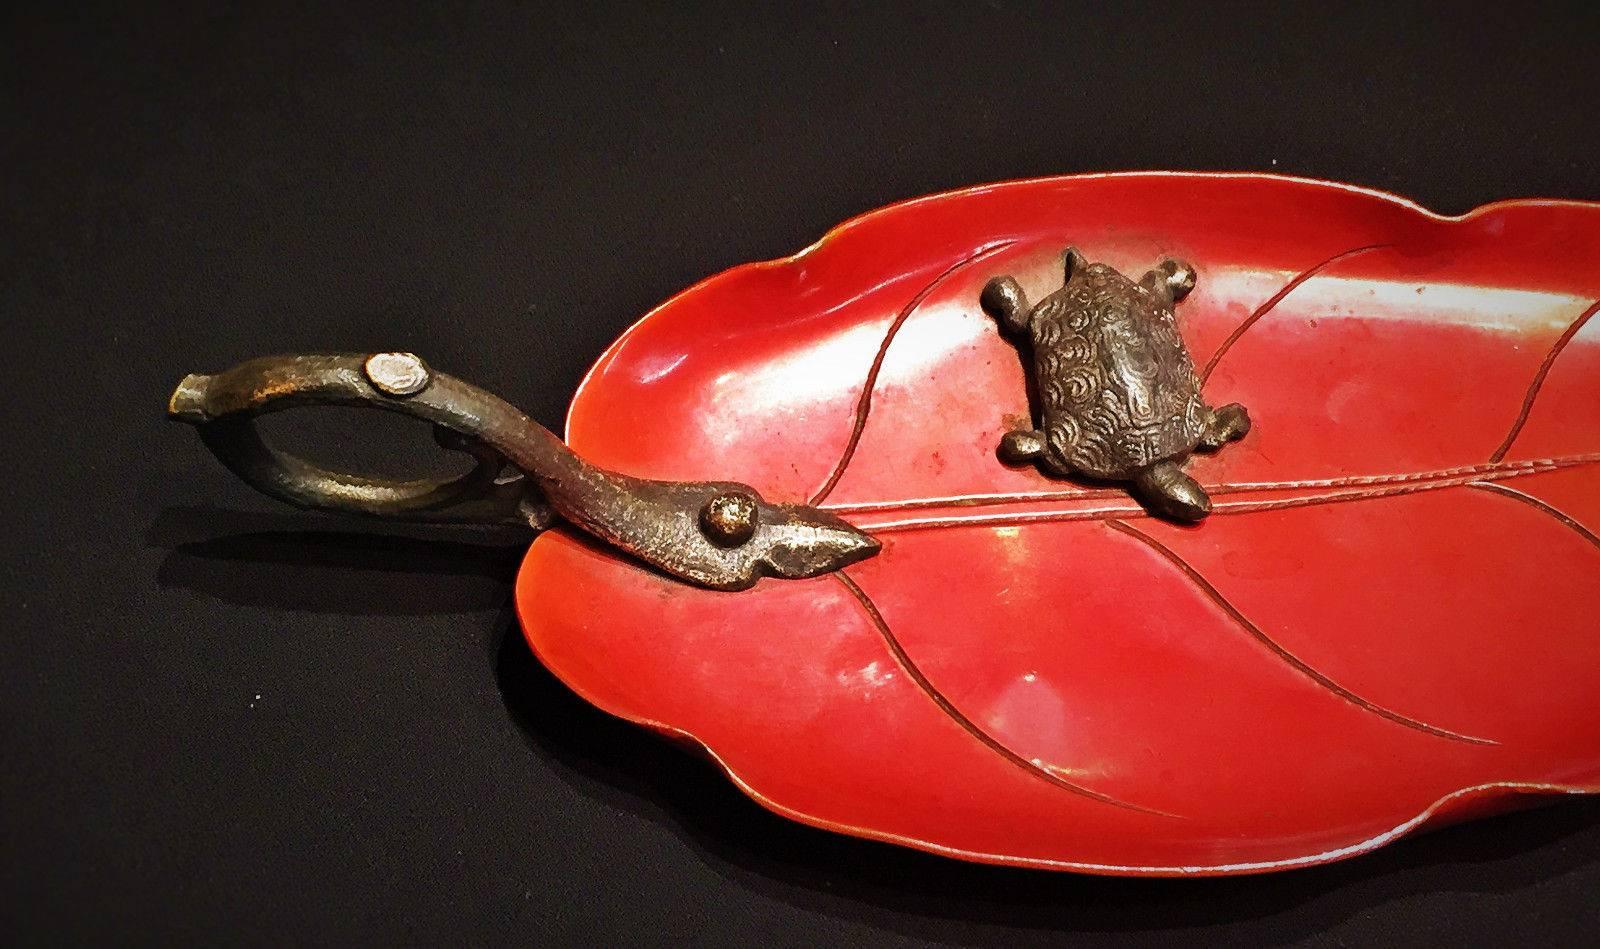 This beautiful terracotta-color lacquered brass jewelry tray in the form of a leaf is tastefully embellished with a patinated bronze handle in form of a branch and a miniature turtle and a fly.